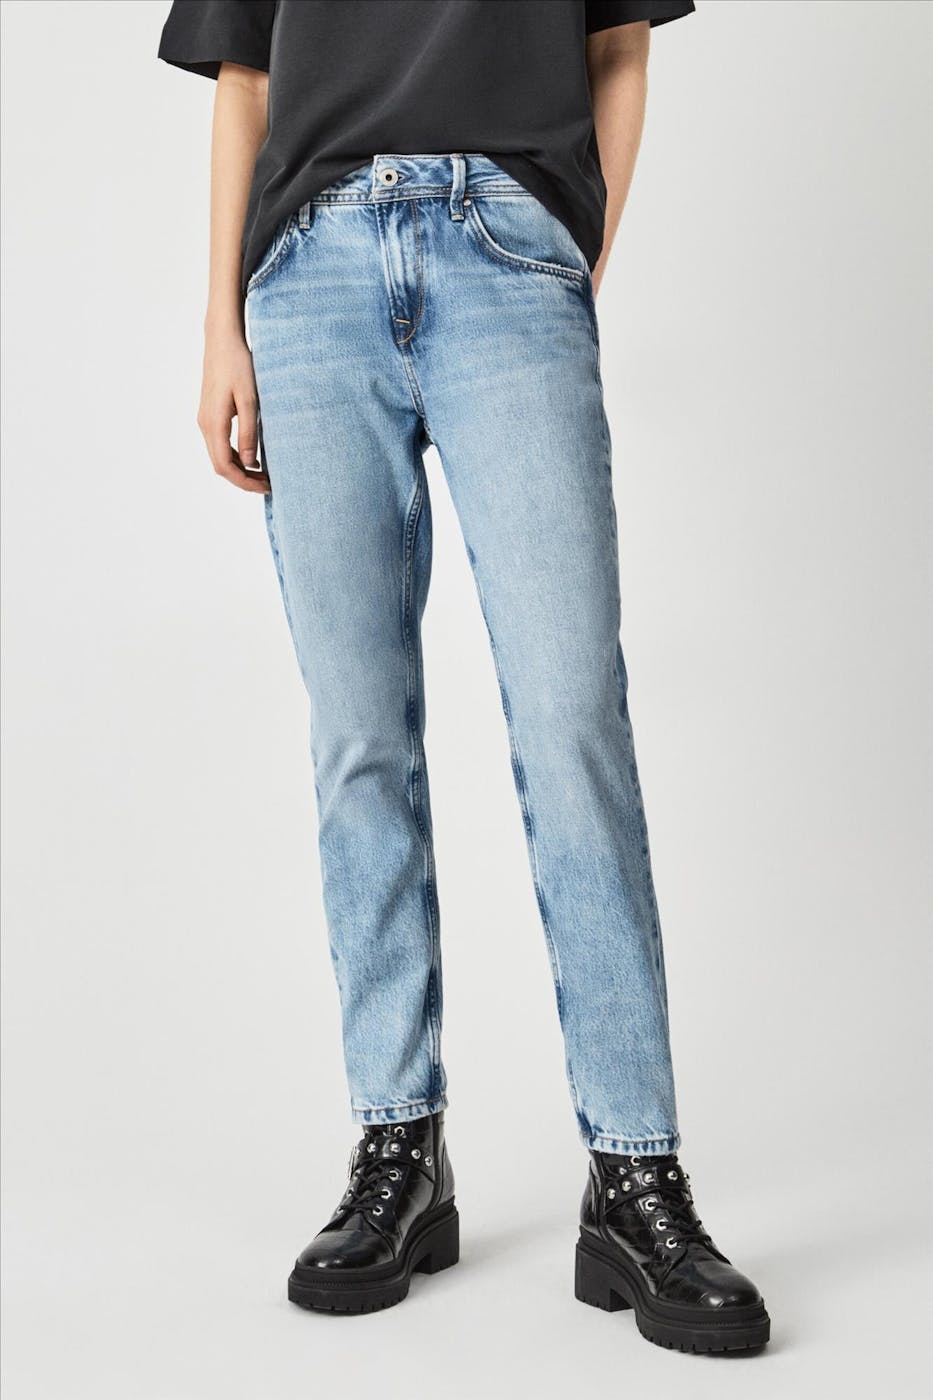 Pepe Jeans London - Lichtblauwe Violet Mom Carrot jeans